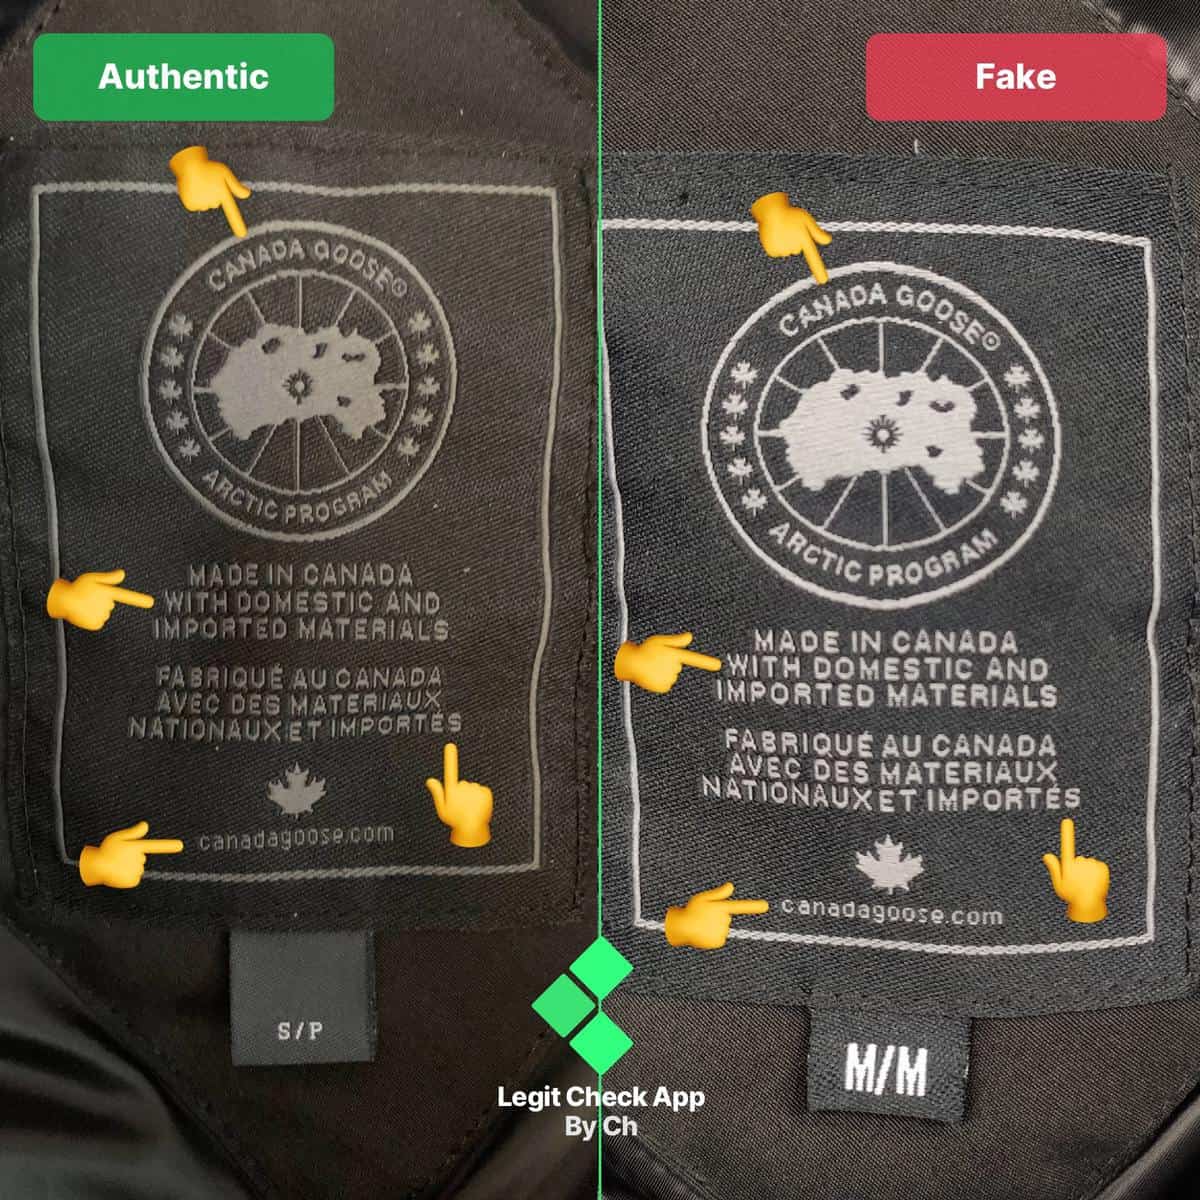 How To Tell Real Vs Fake Canada Goose Items - Check By Ch